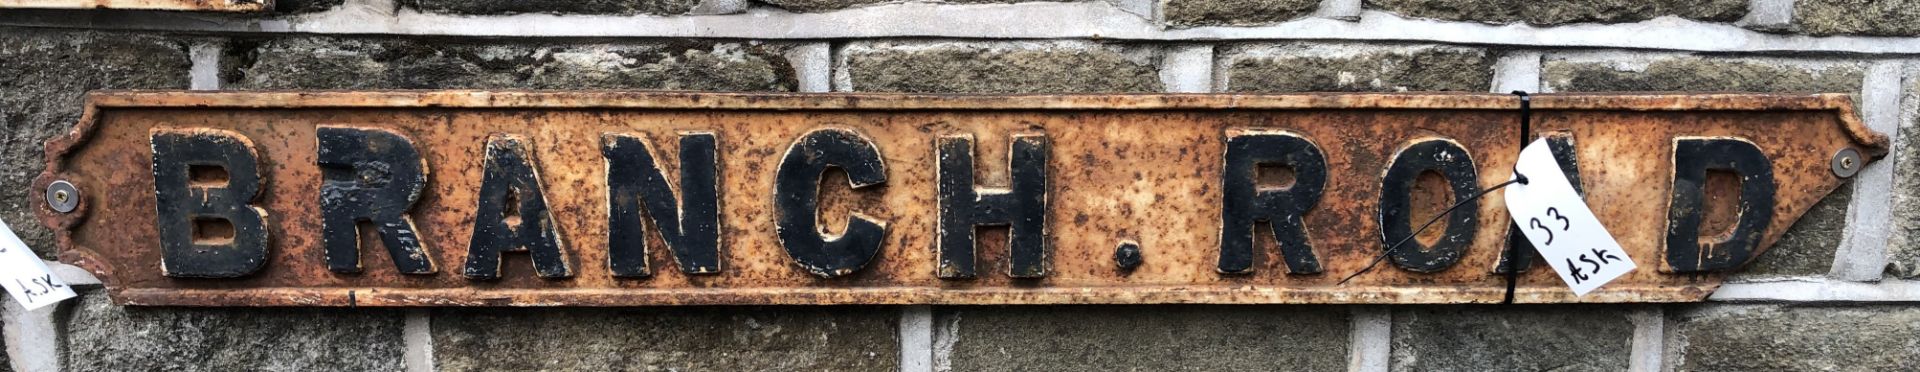 Cast iron Victorian Street Sign “Branch Road”